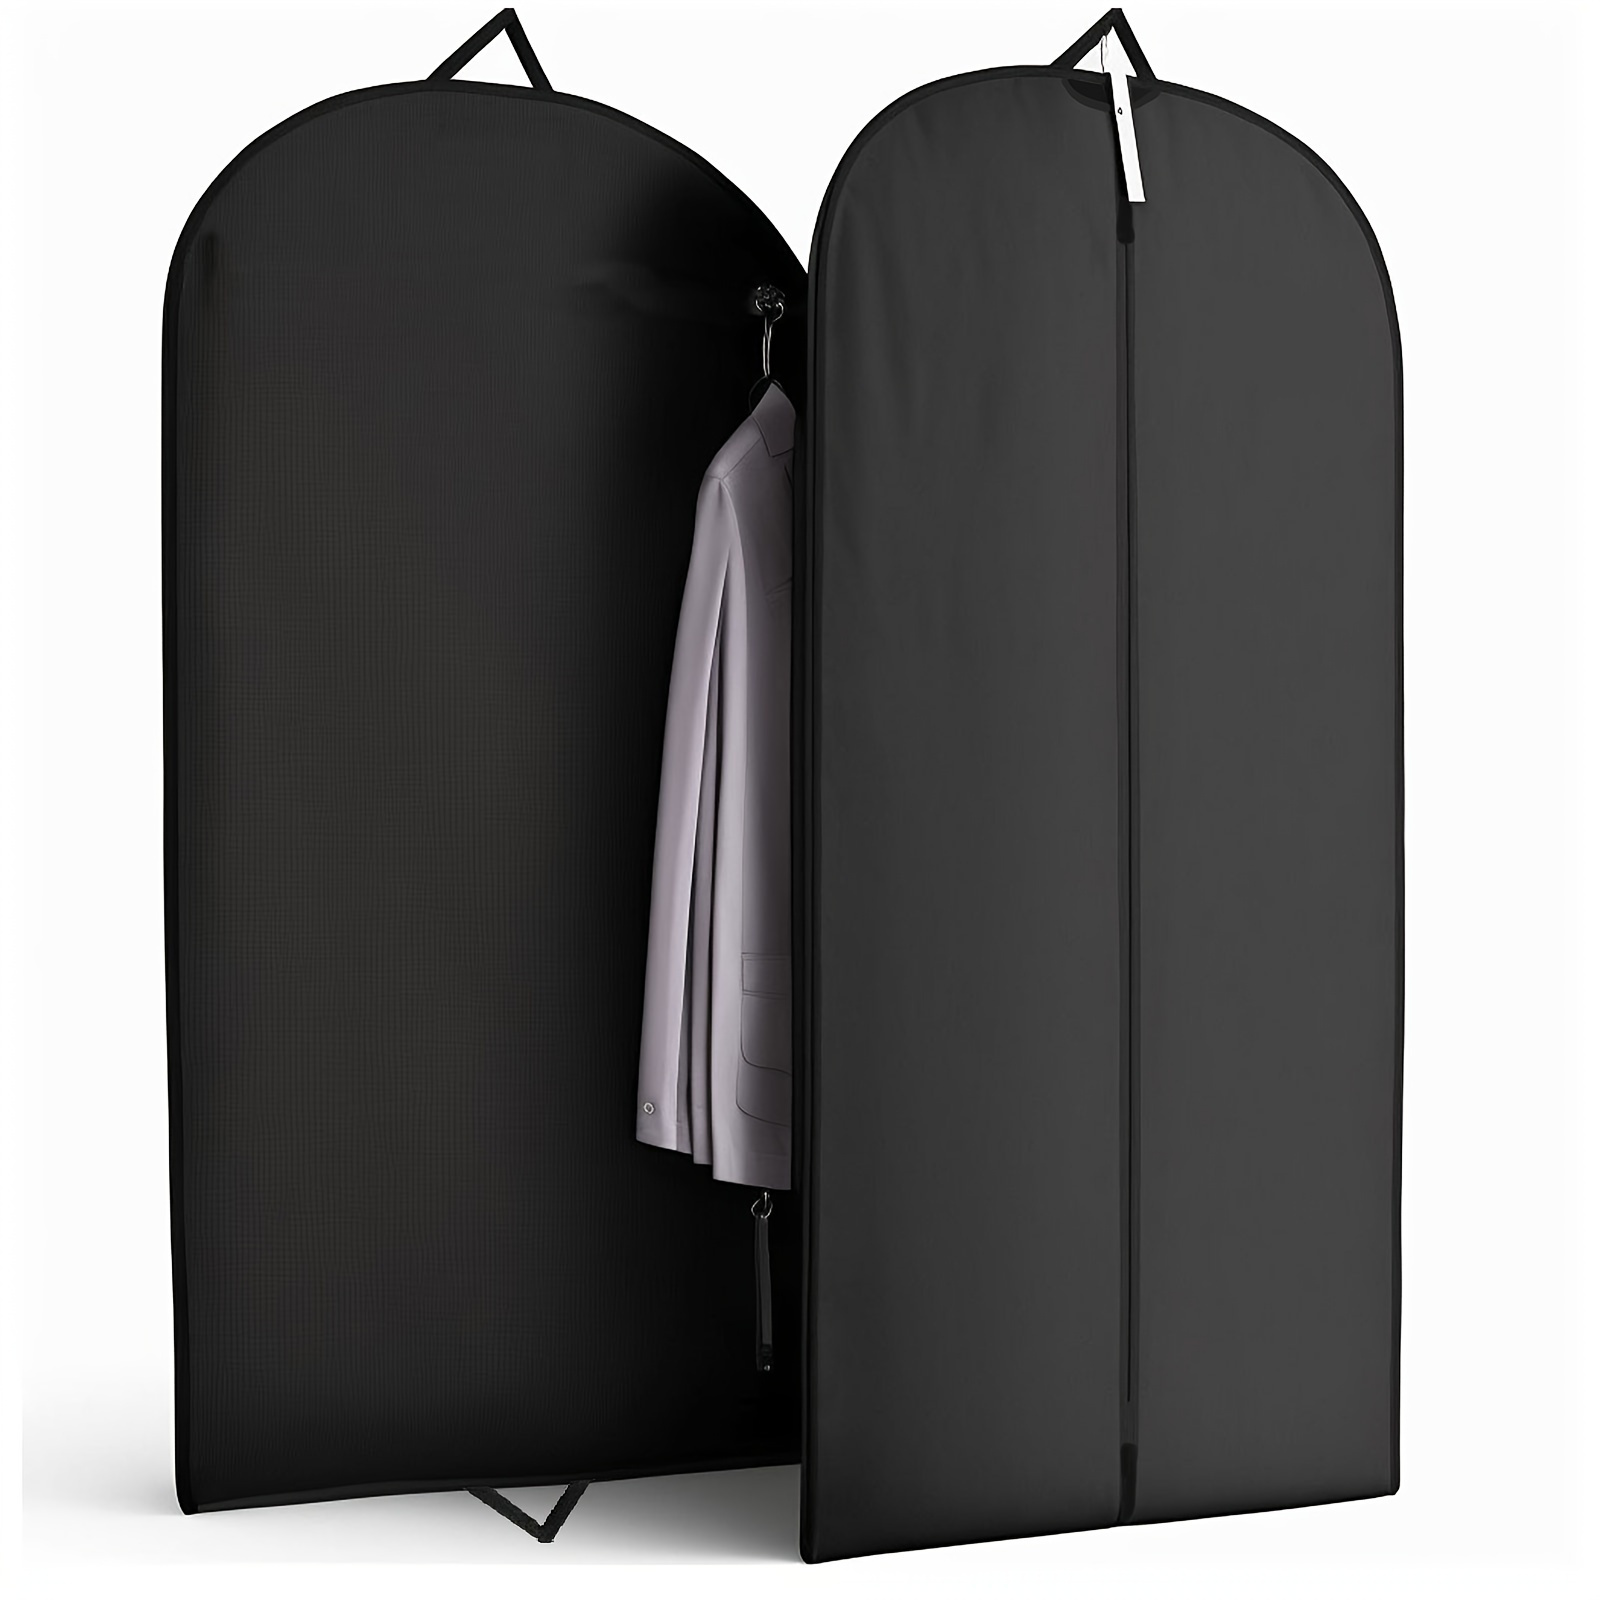 

1/5pcs Suit Dust Cover Bag With Zipper, Hanging Clothes Storage Bags For Shirt, Suit, Dress, Coat, Portable Garment Bags, Household Storage Organizer For Bedroom, Closet, Wardrobe, Home, Dorm